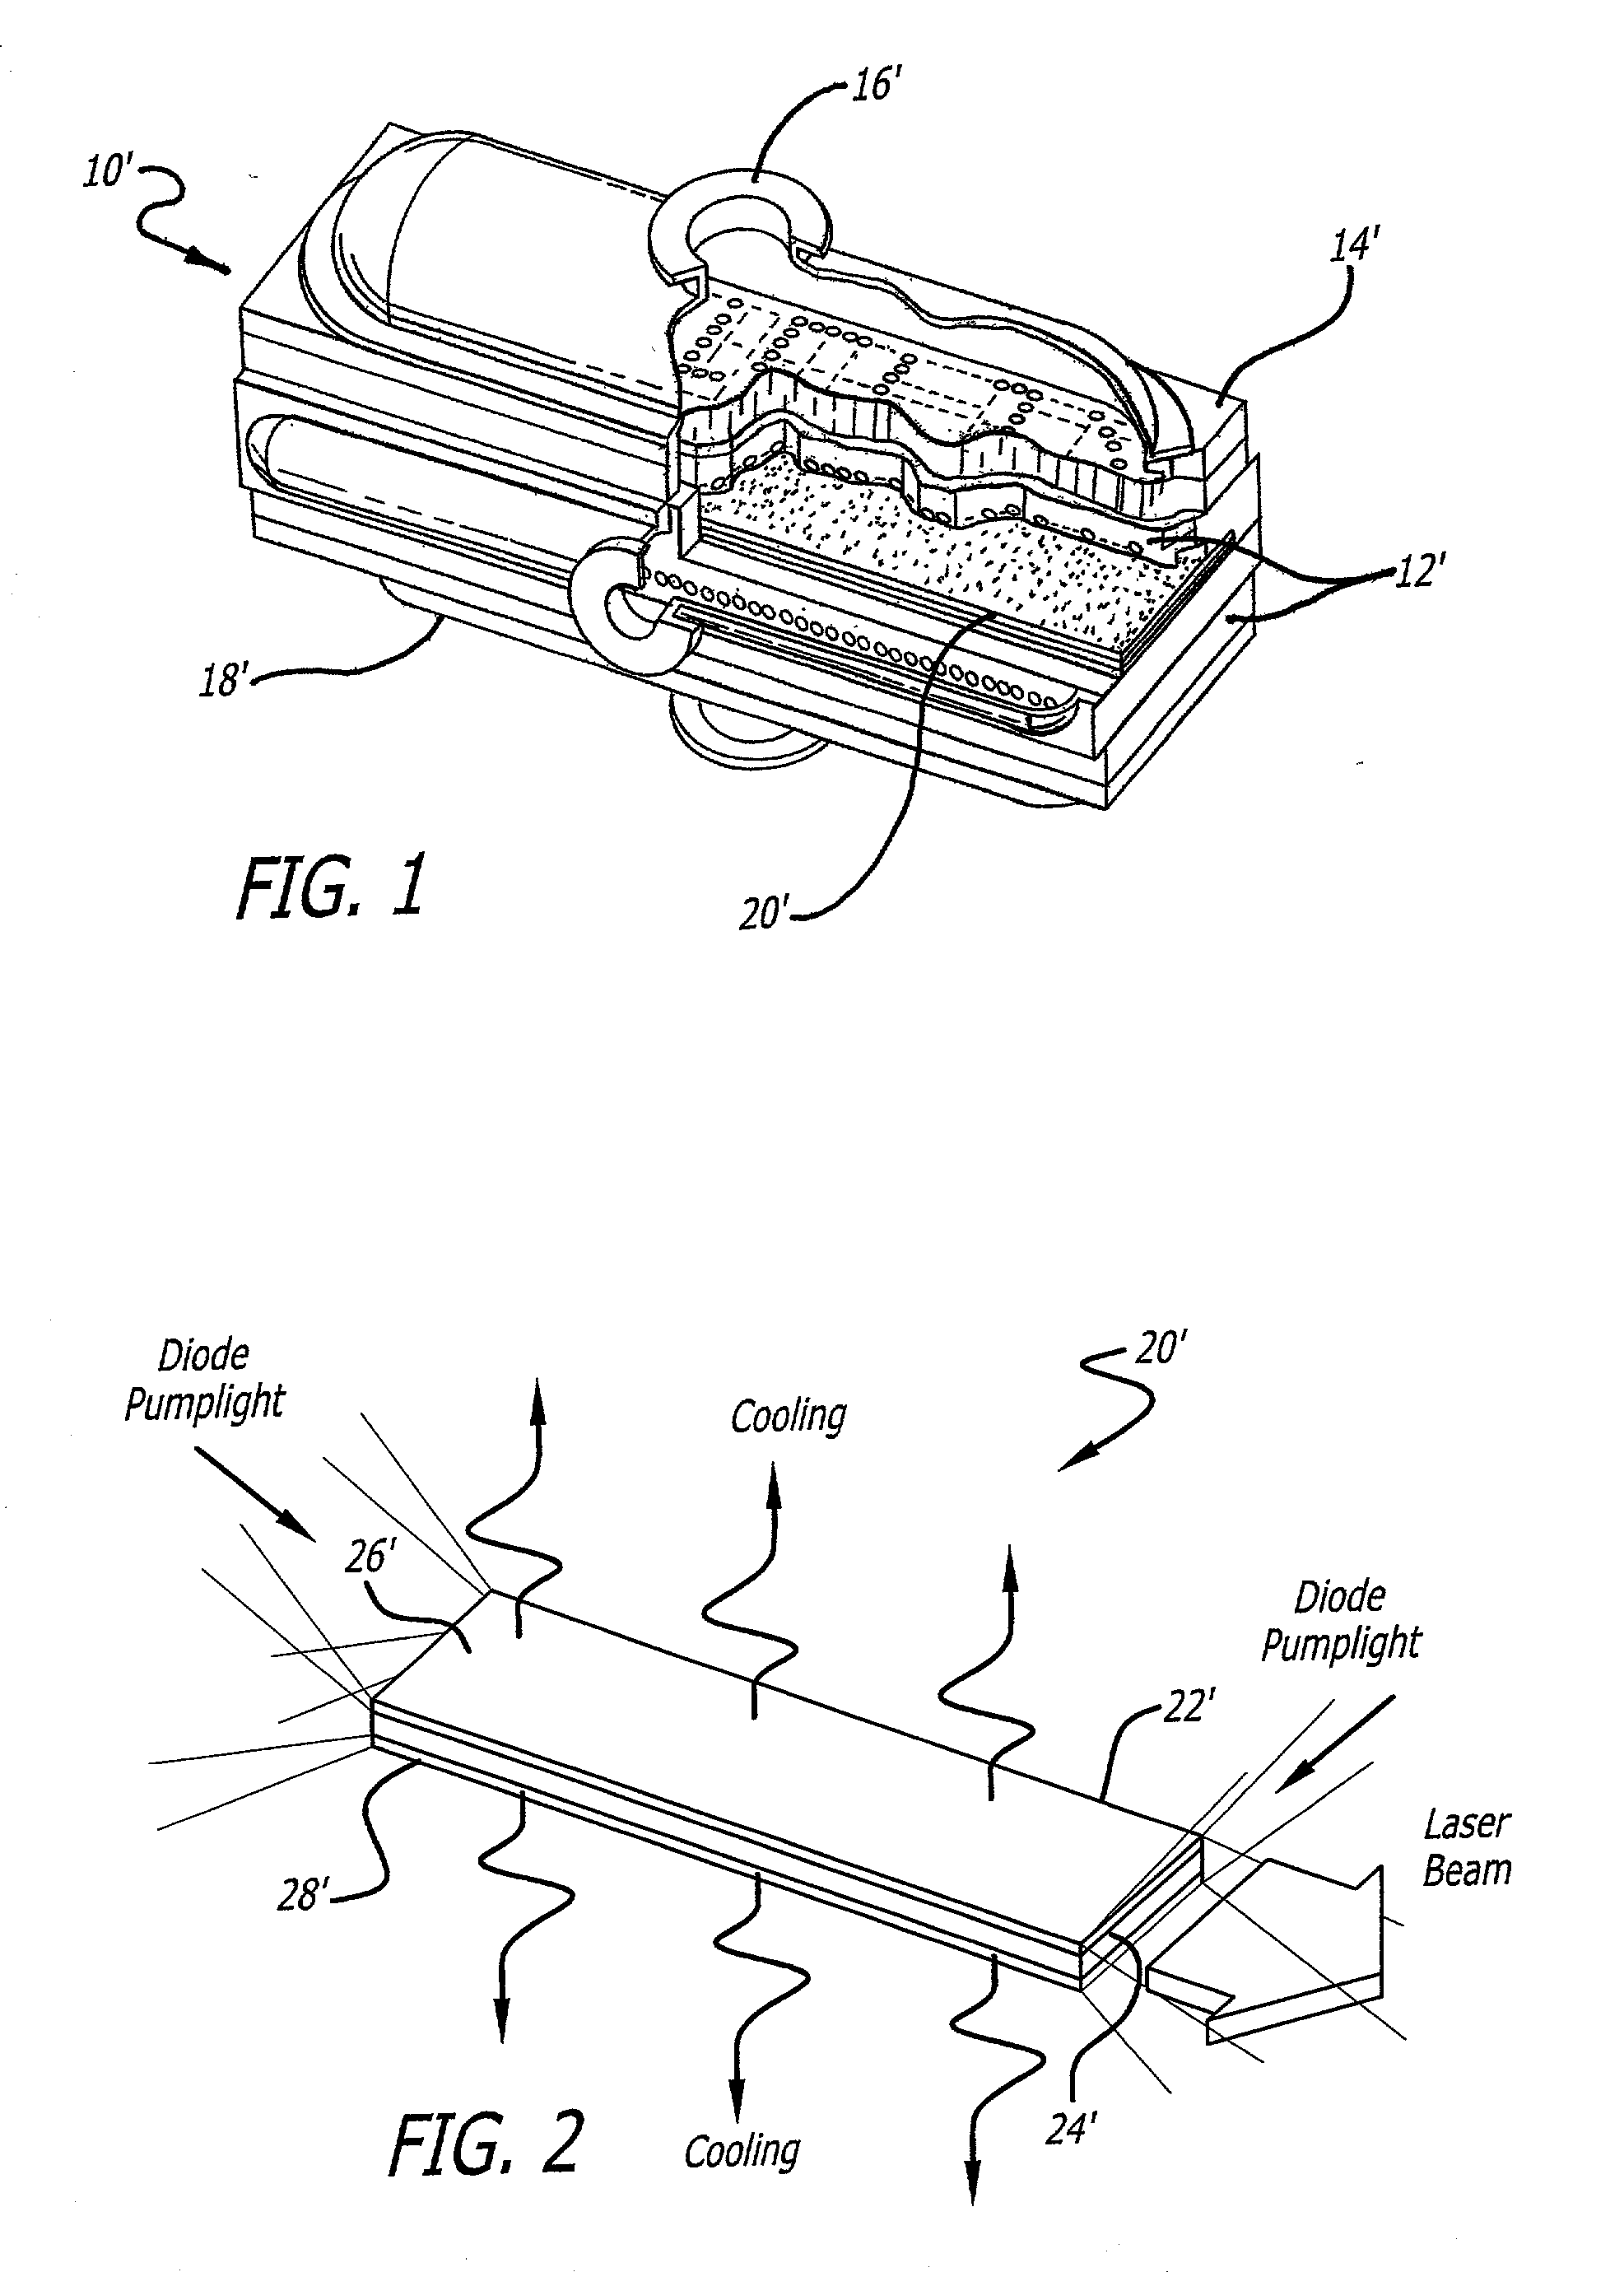 Laser cooling apparatus and method